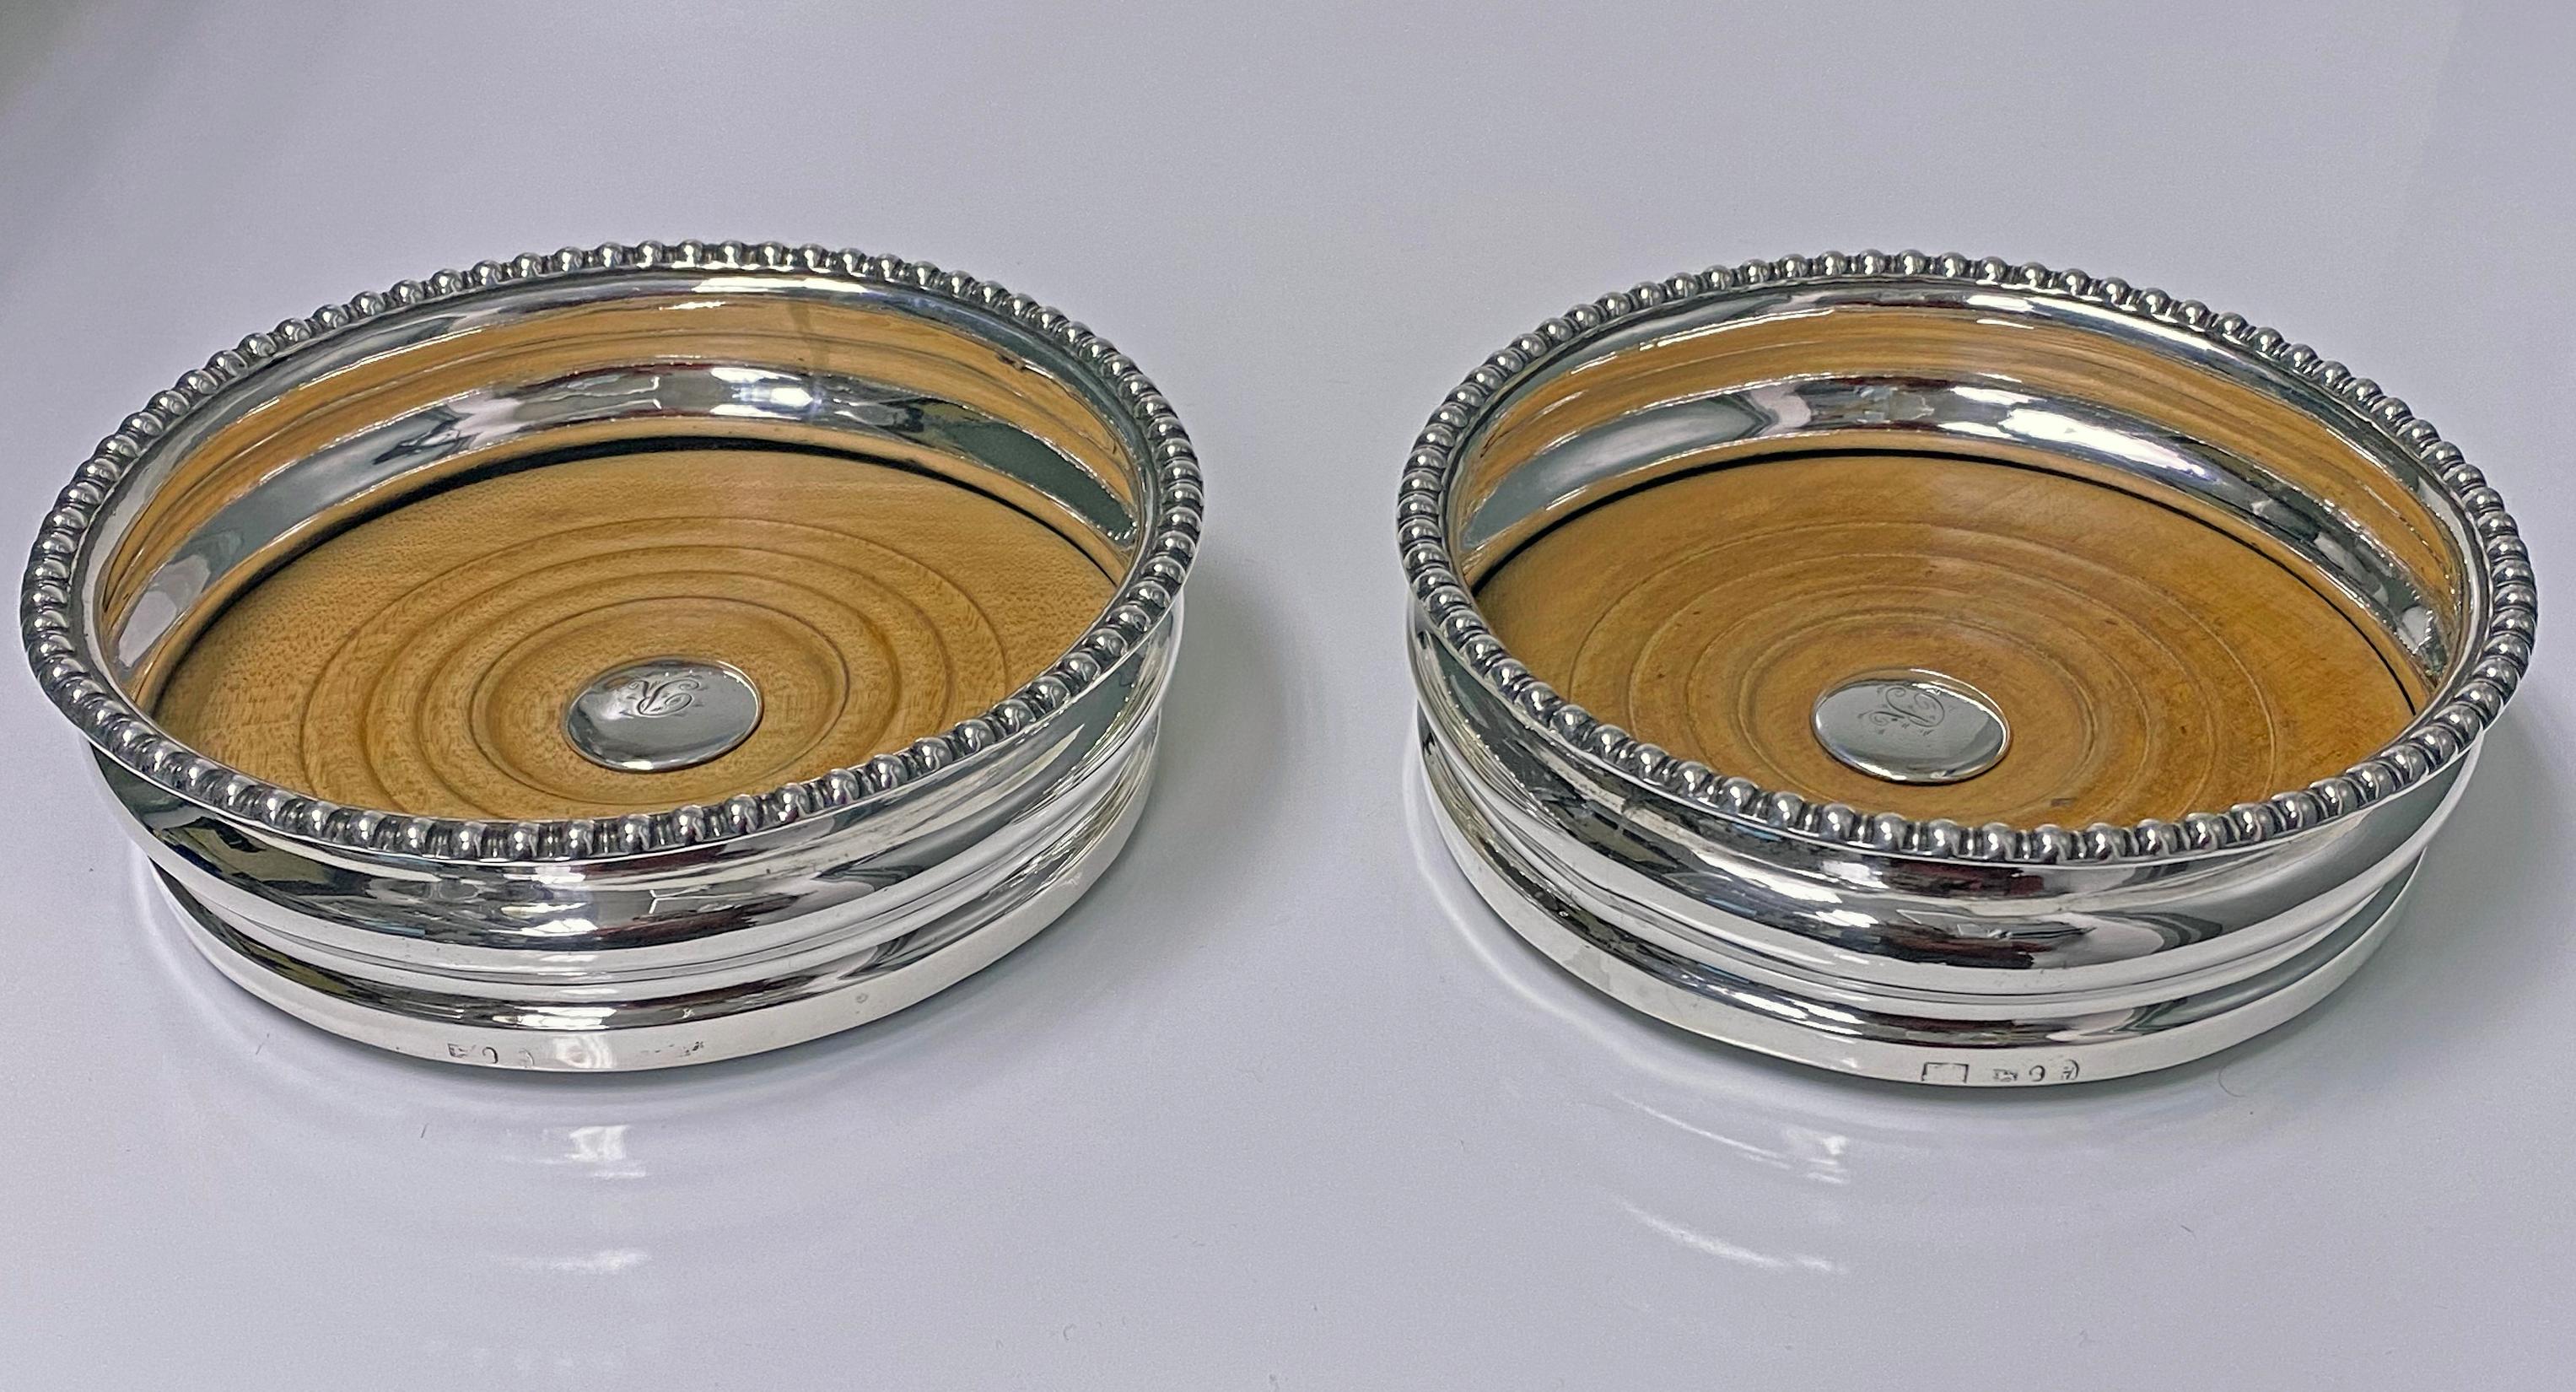 Antique Georgian sterling silver wine coasters, city of Sheffield 1810, Thomas Blagden. Each of circular rounded shaped form, plain ribbed bodies, gadroon borders. Original turned wood bases, central silver bosses with letter R. Baize to undersides.